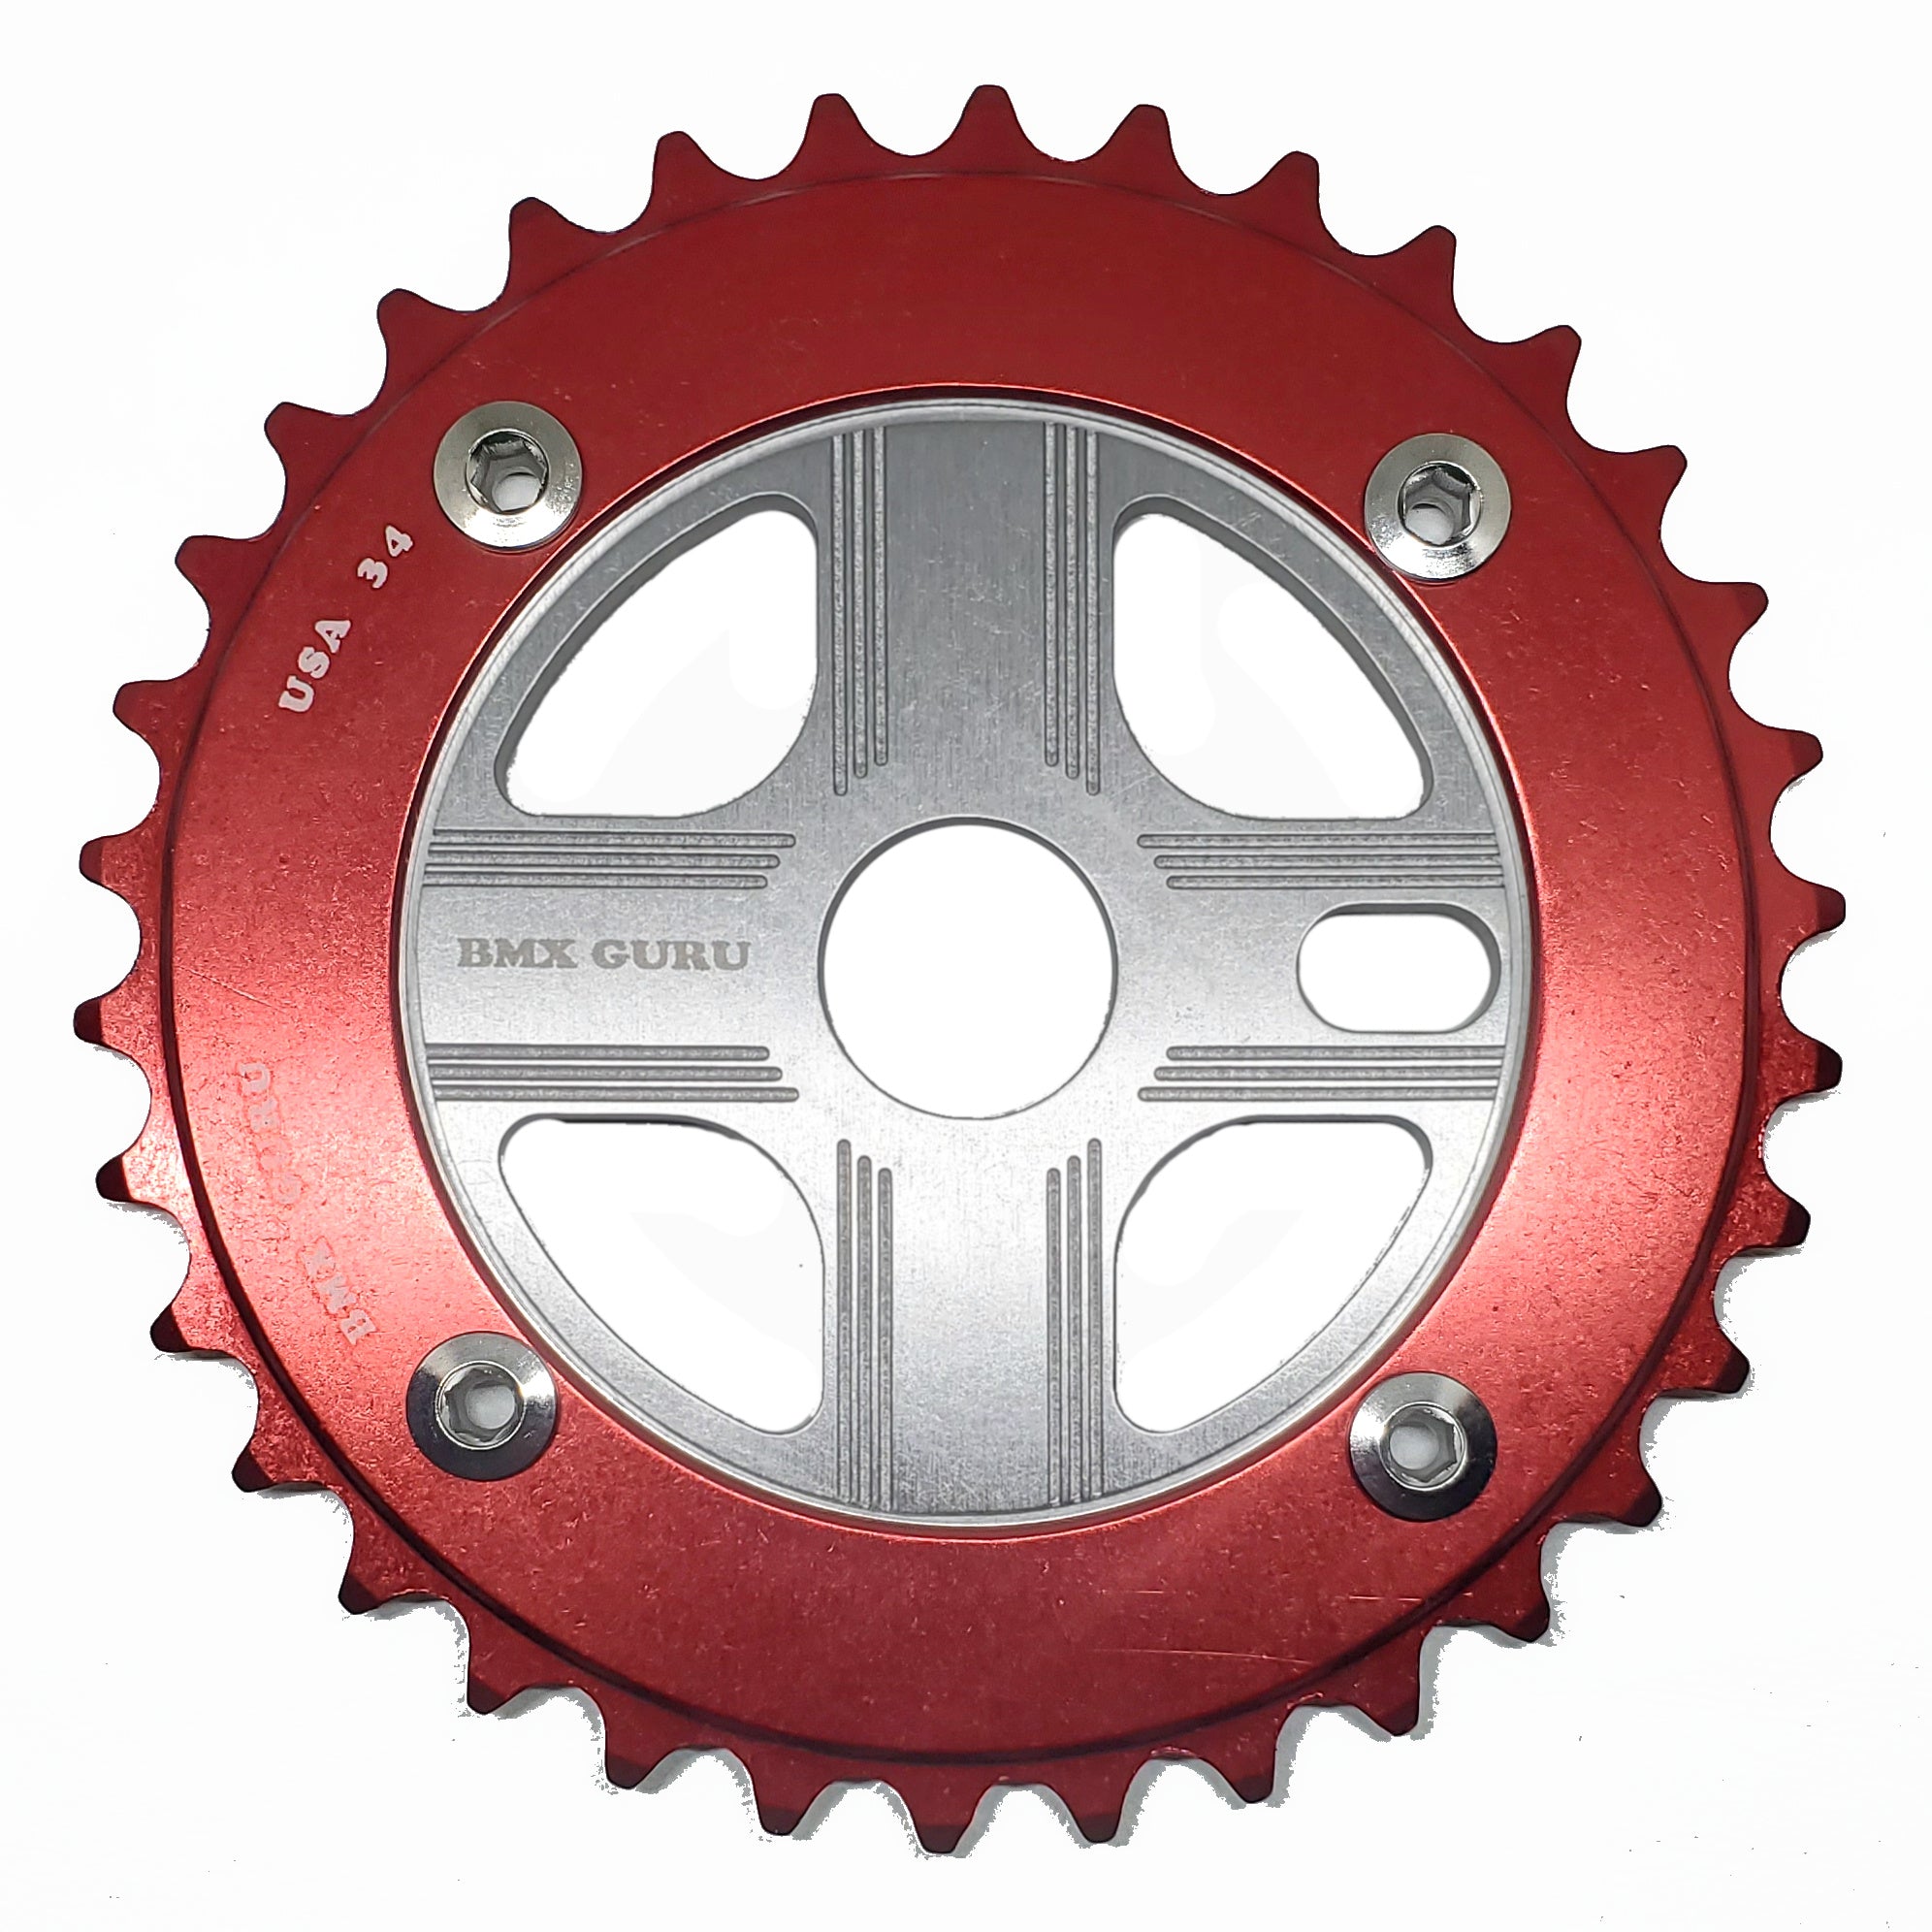 BMXGuru 34T Aluminum Spider & 4-bolt Chainring Combo - Red over Silver - USA Made